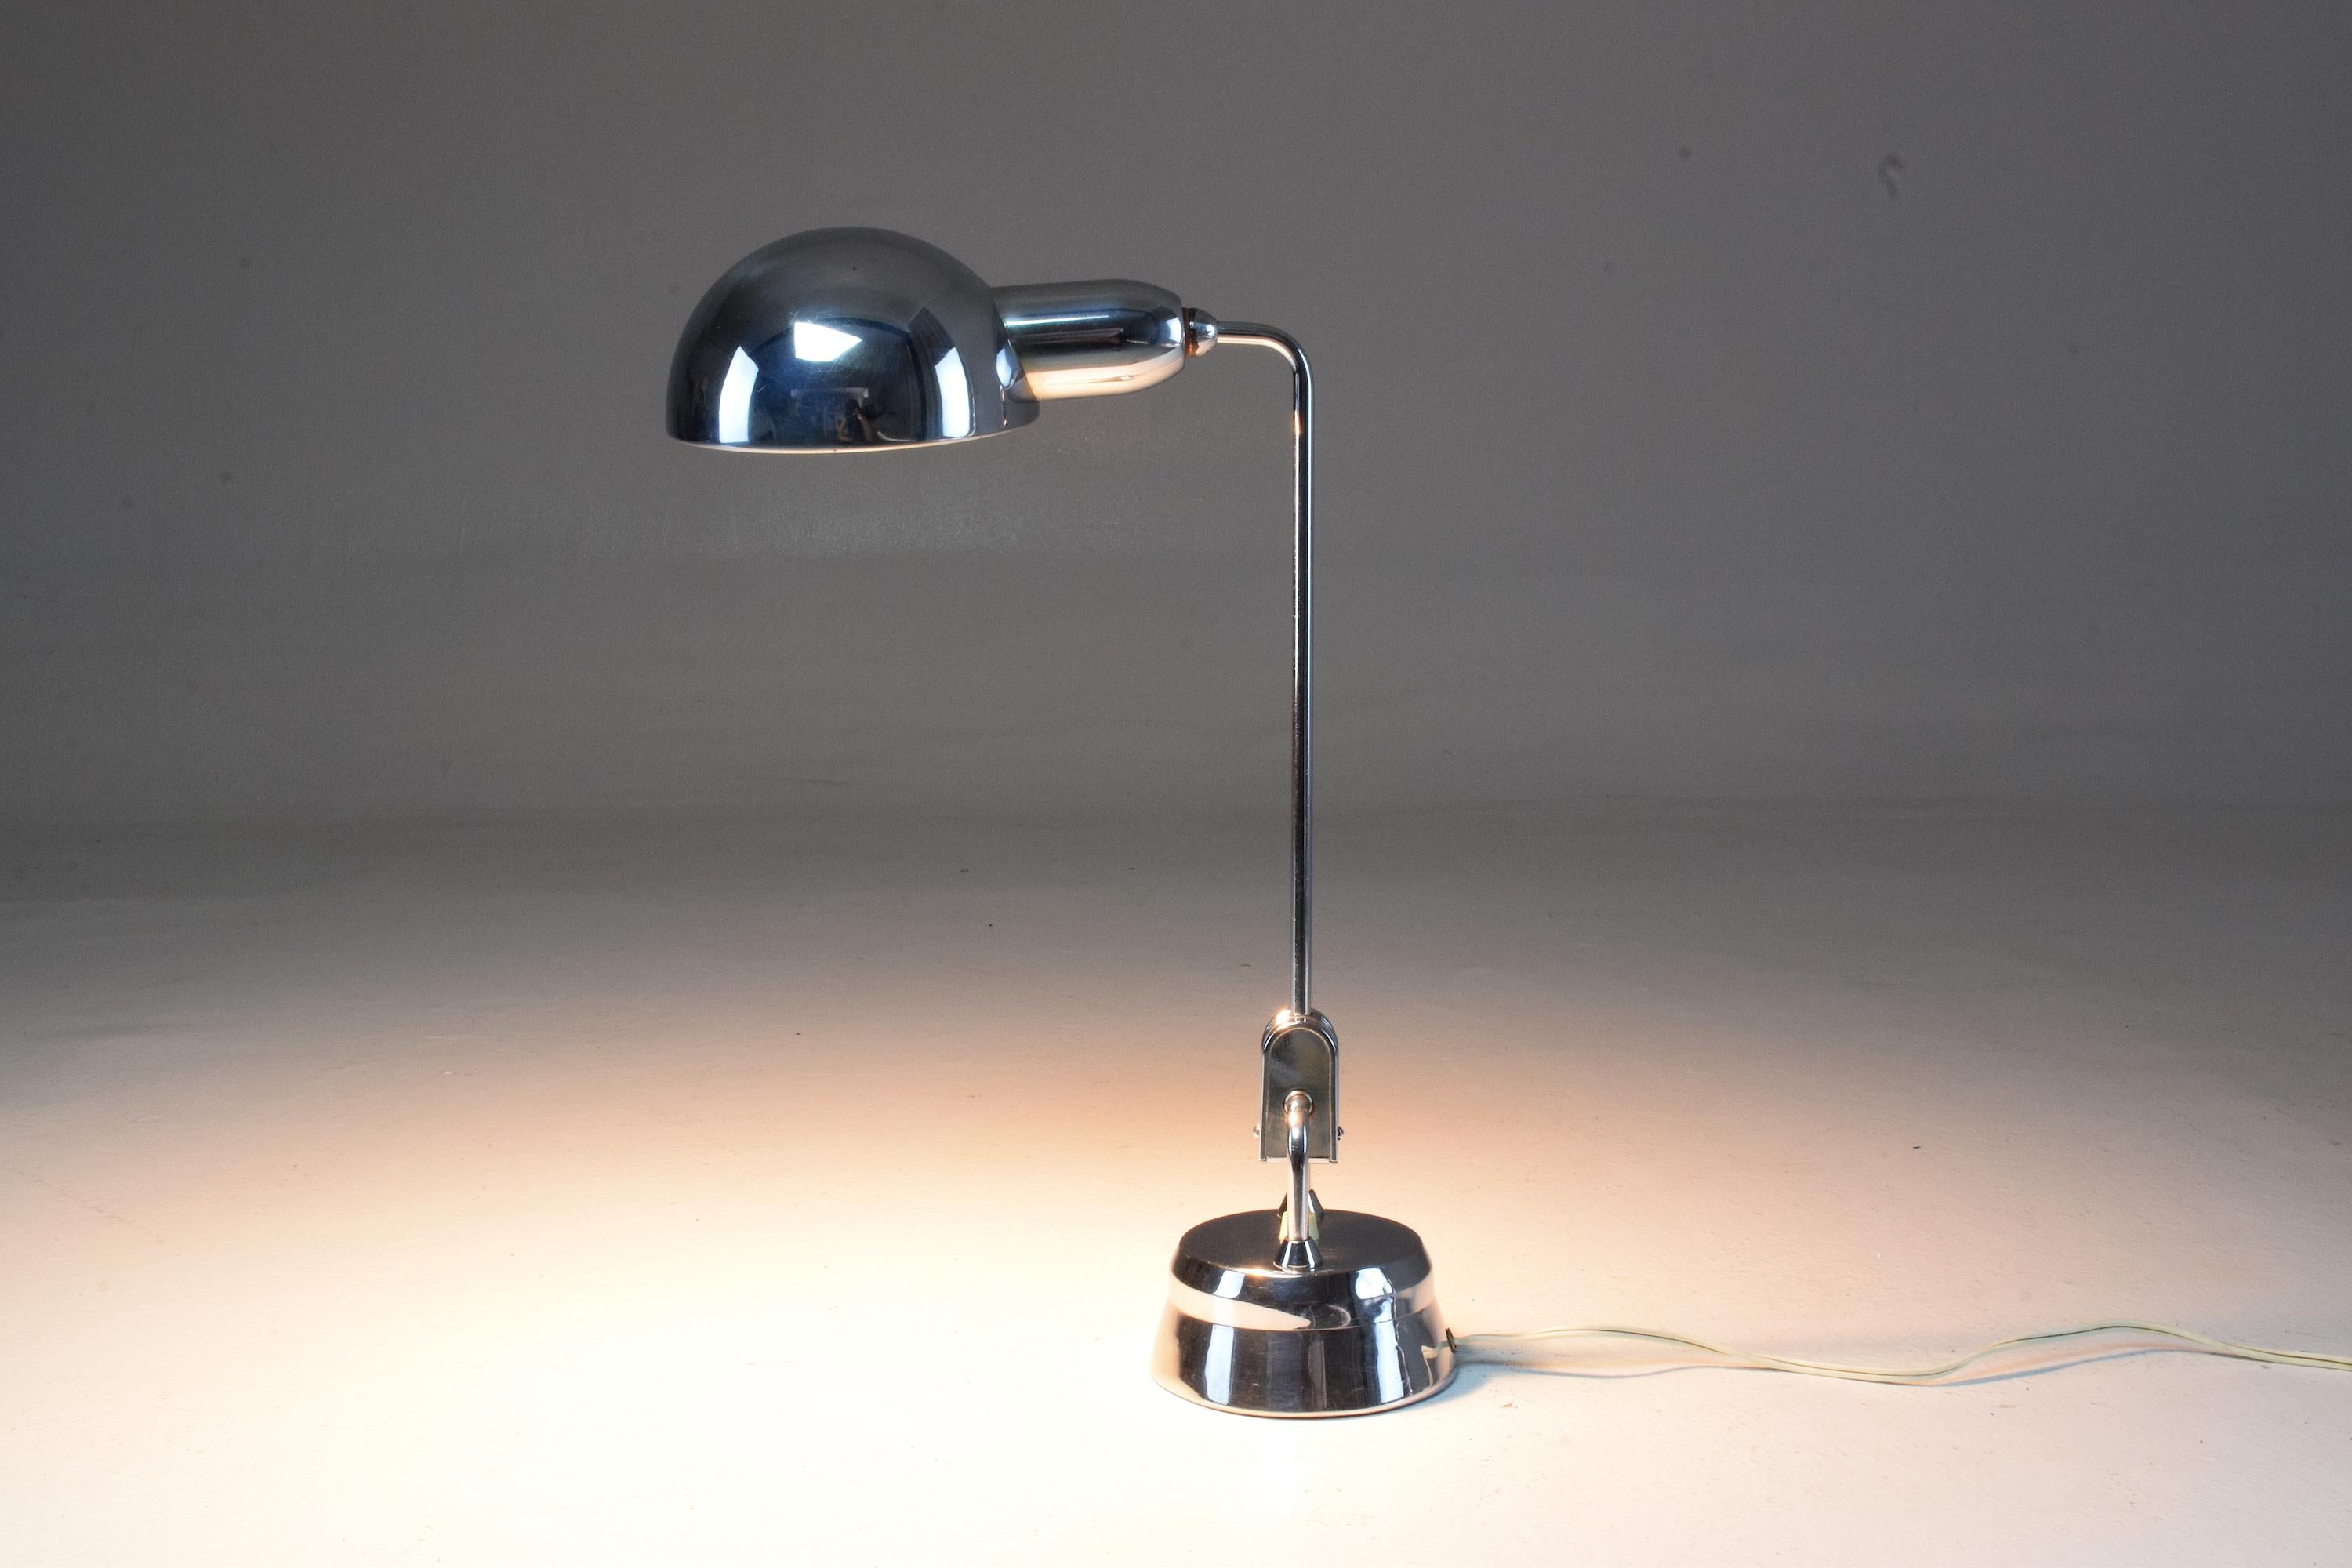 20th century vintage desk, office or bedside table lamp designed by Charlotte Perriand for Jumo composed of a chrome steel structure, semi sphere shade, pivotal tubular stem and light switch at the round base. 
Marked 600 at the base.
  